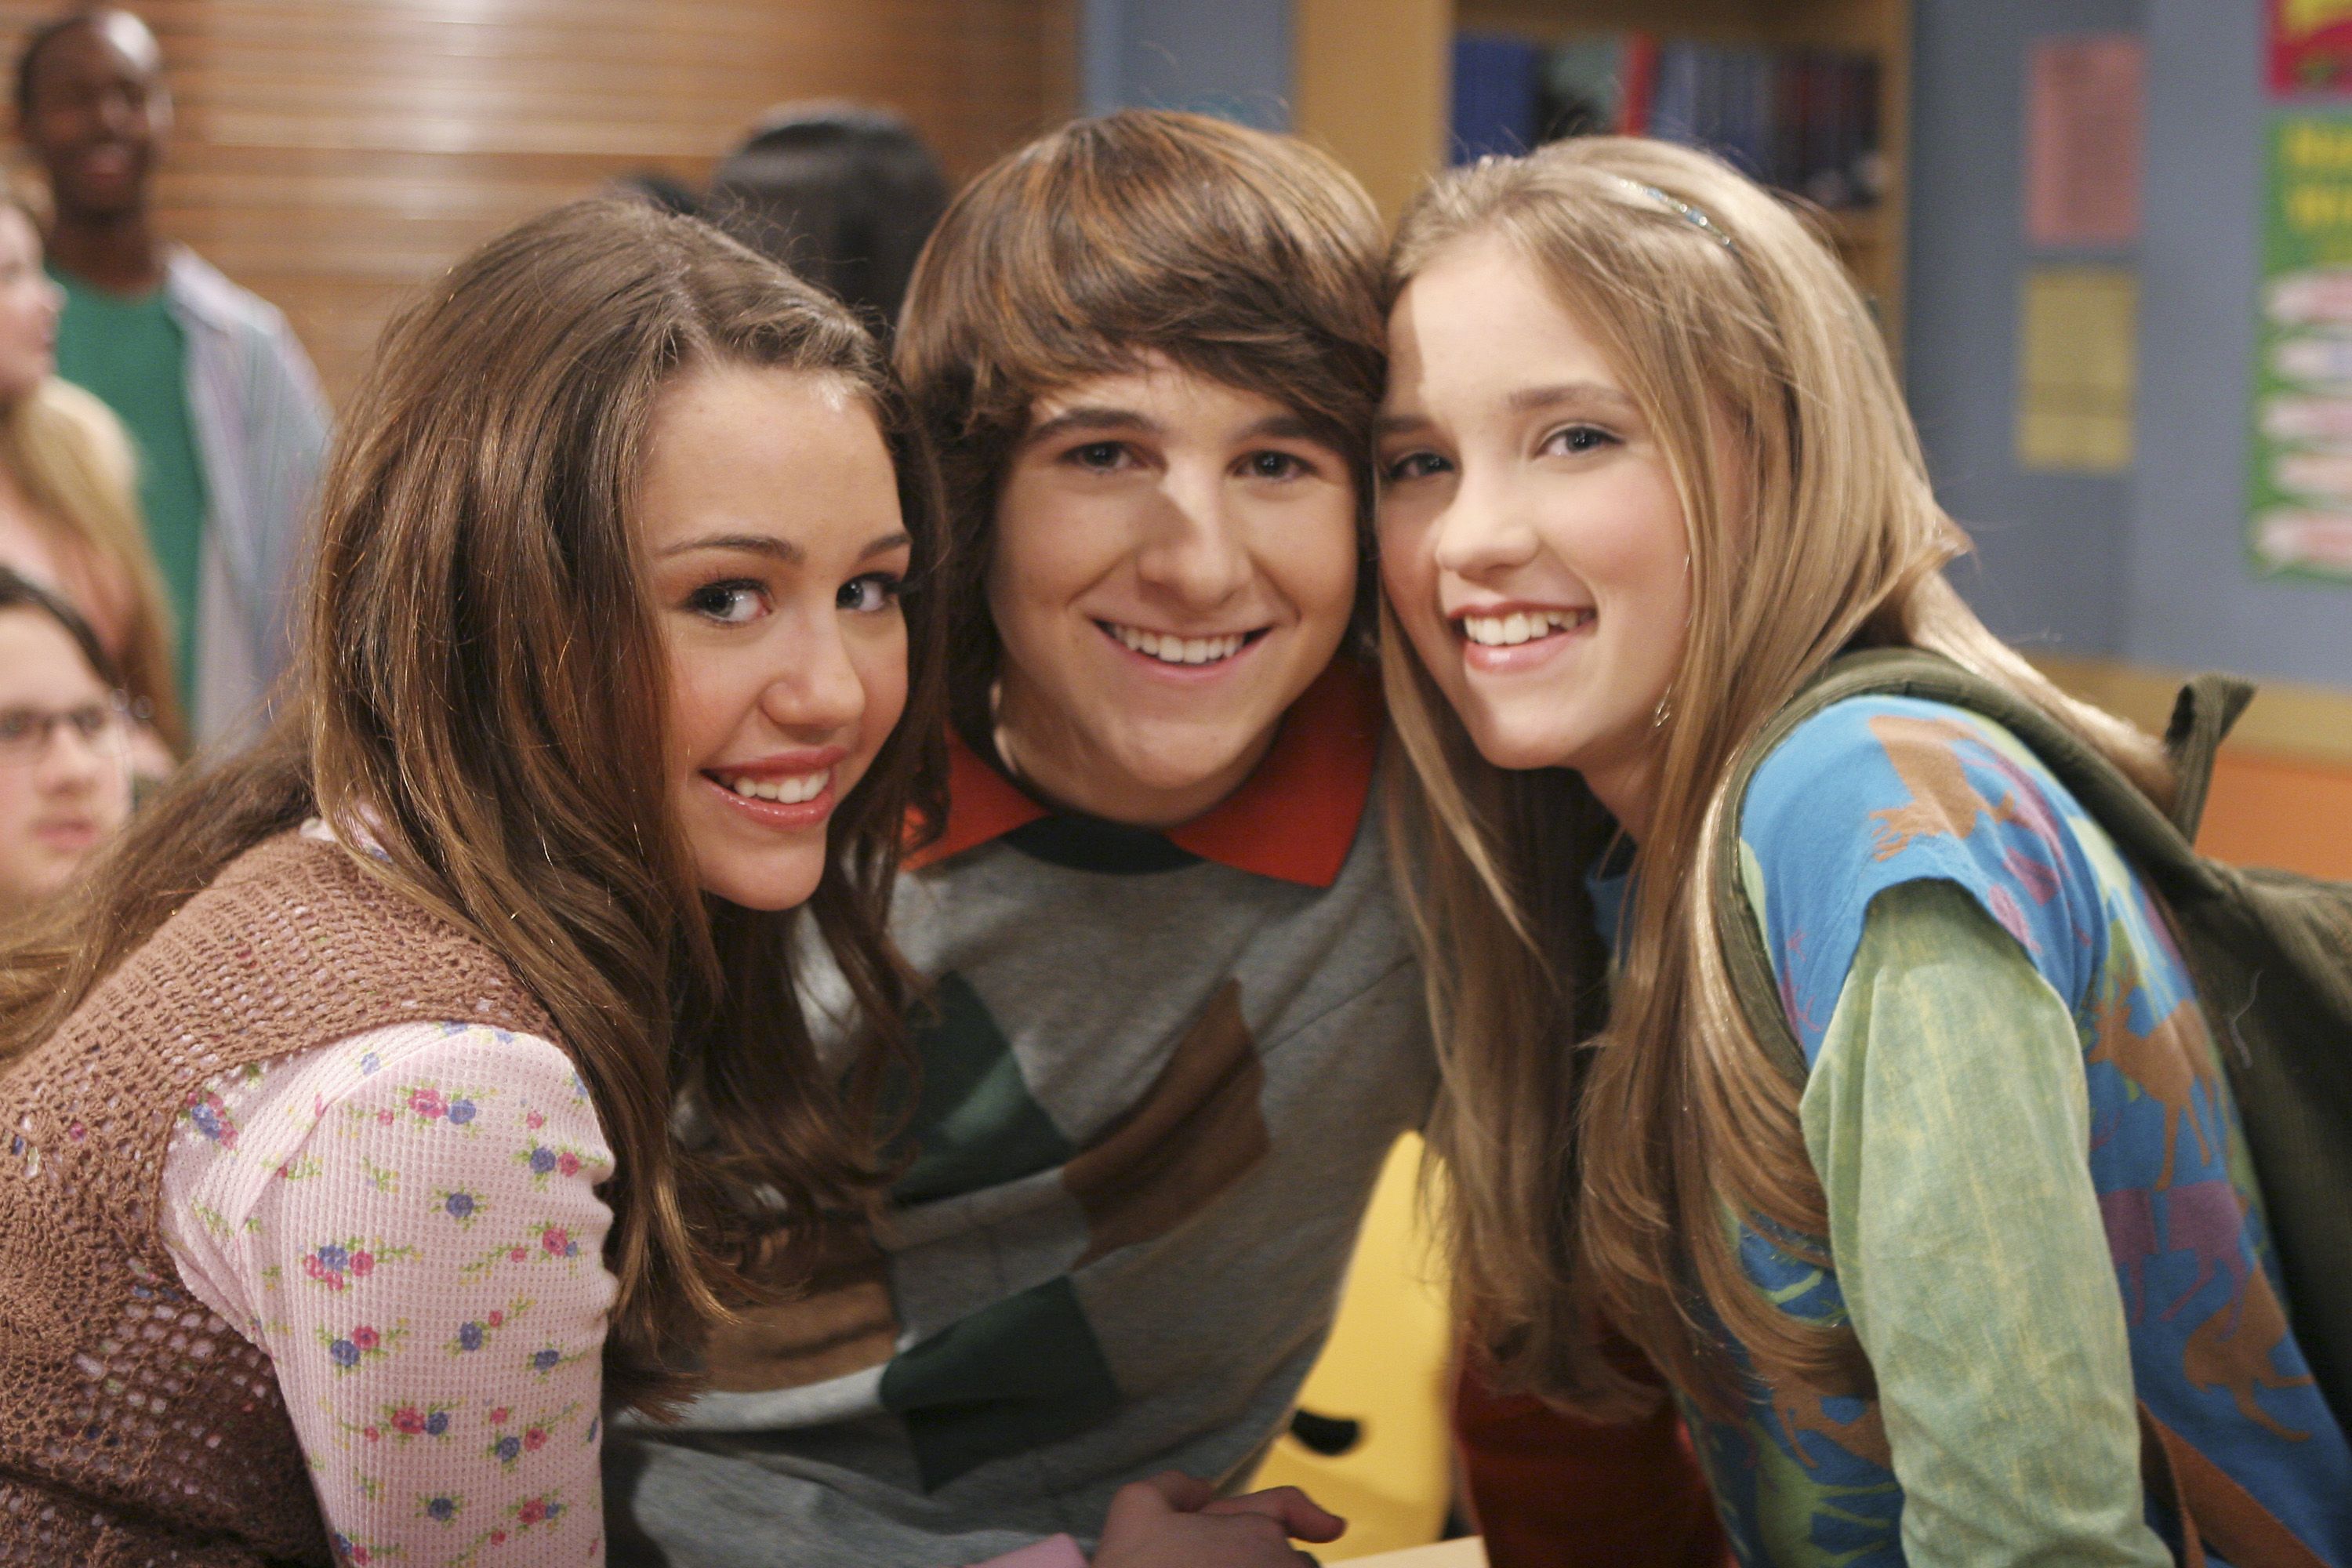 400. Who are Miley Cyrus, Mitchell Musso, and Emily Osment? 